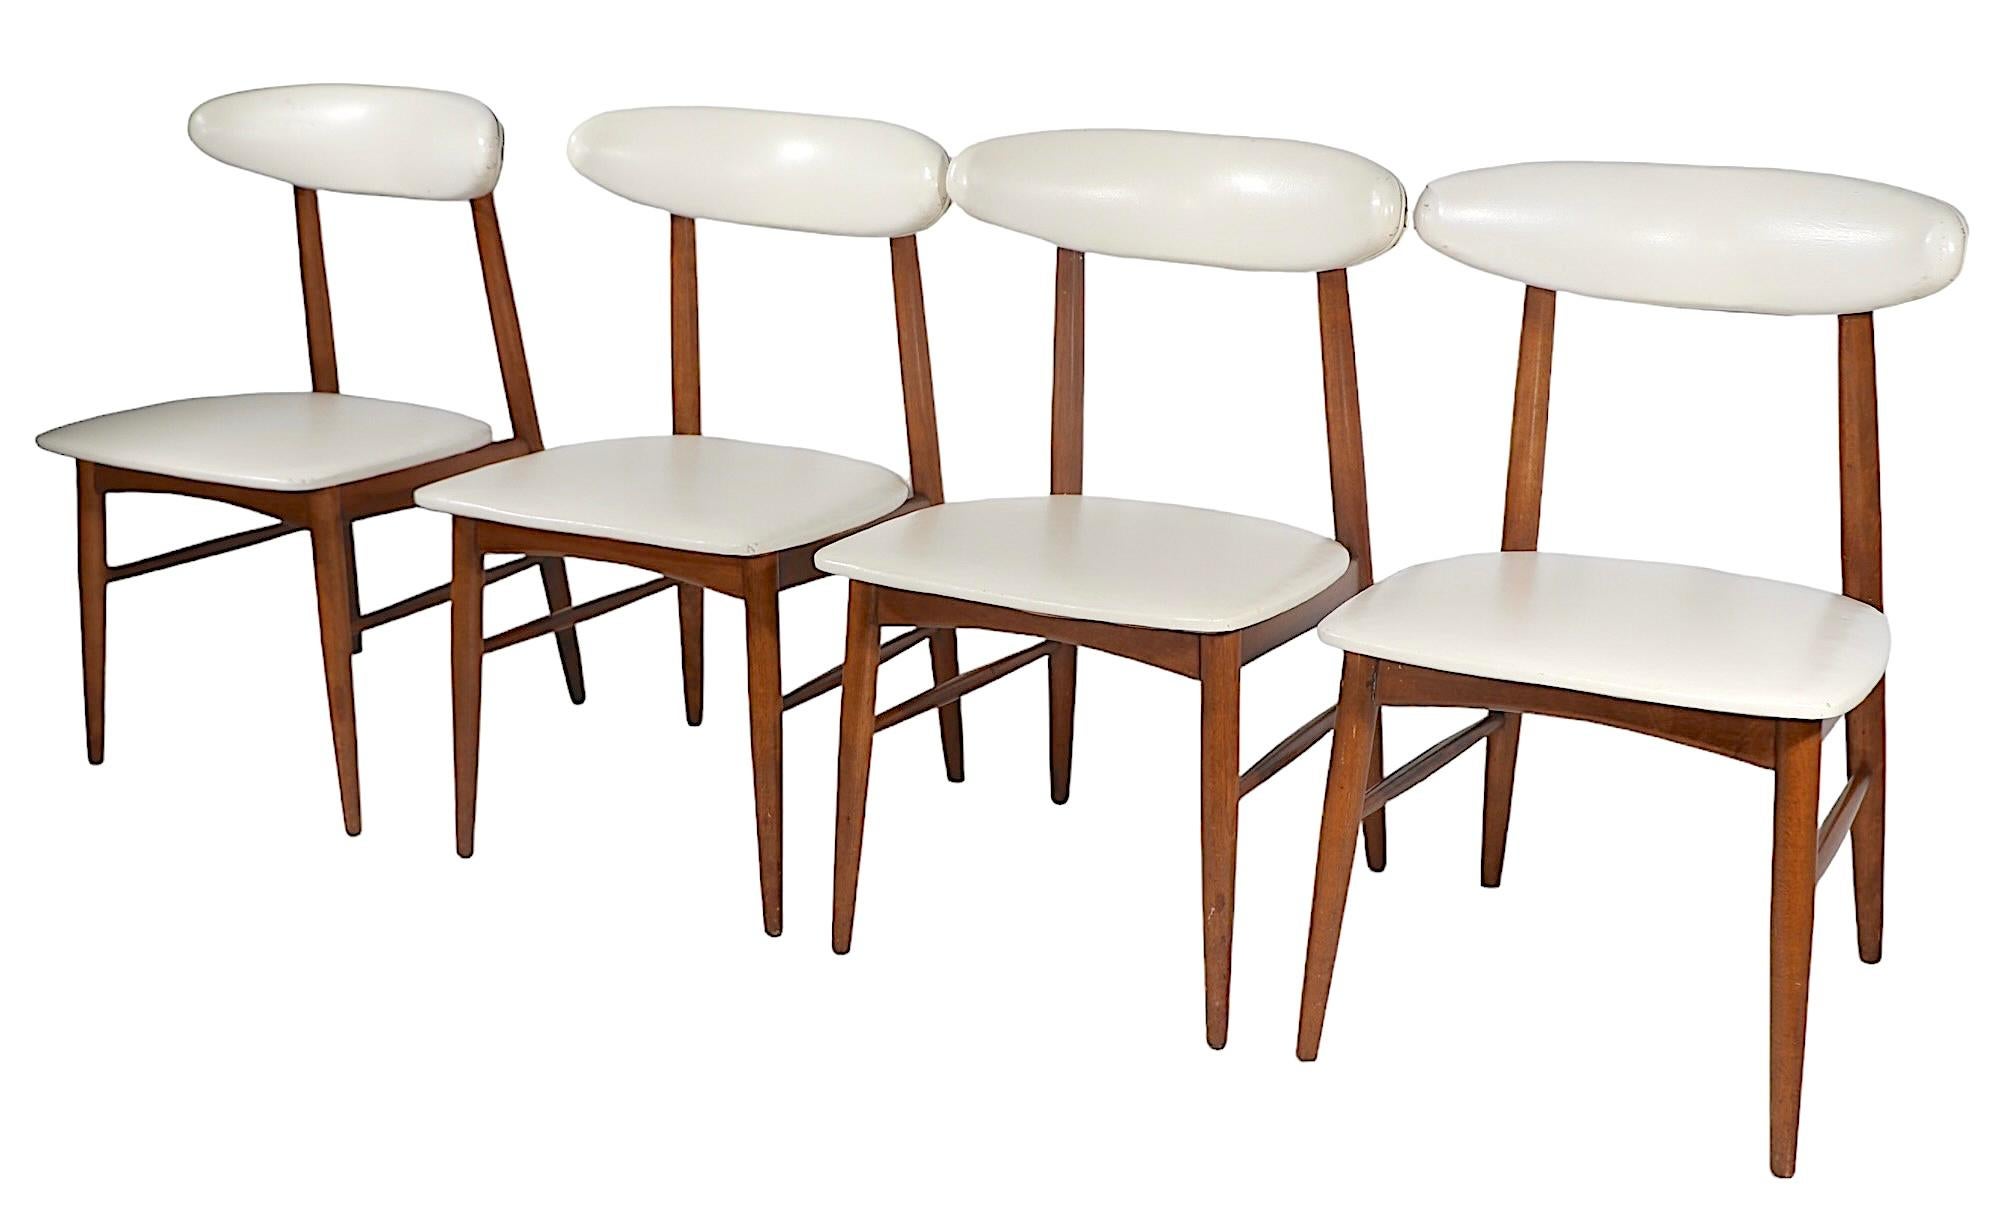 5 pc Mid Century Dinette Set by Viko Baumritter c 1950’s For Sale 7